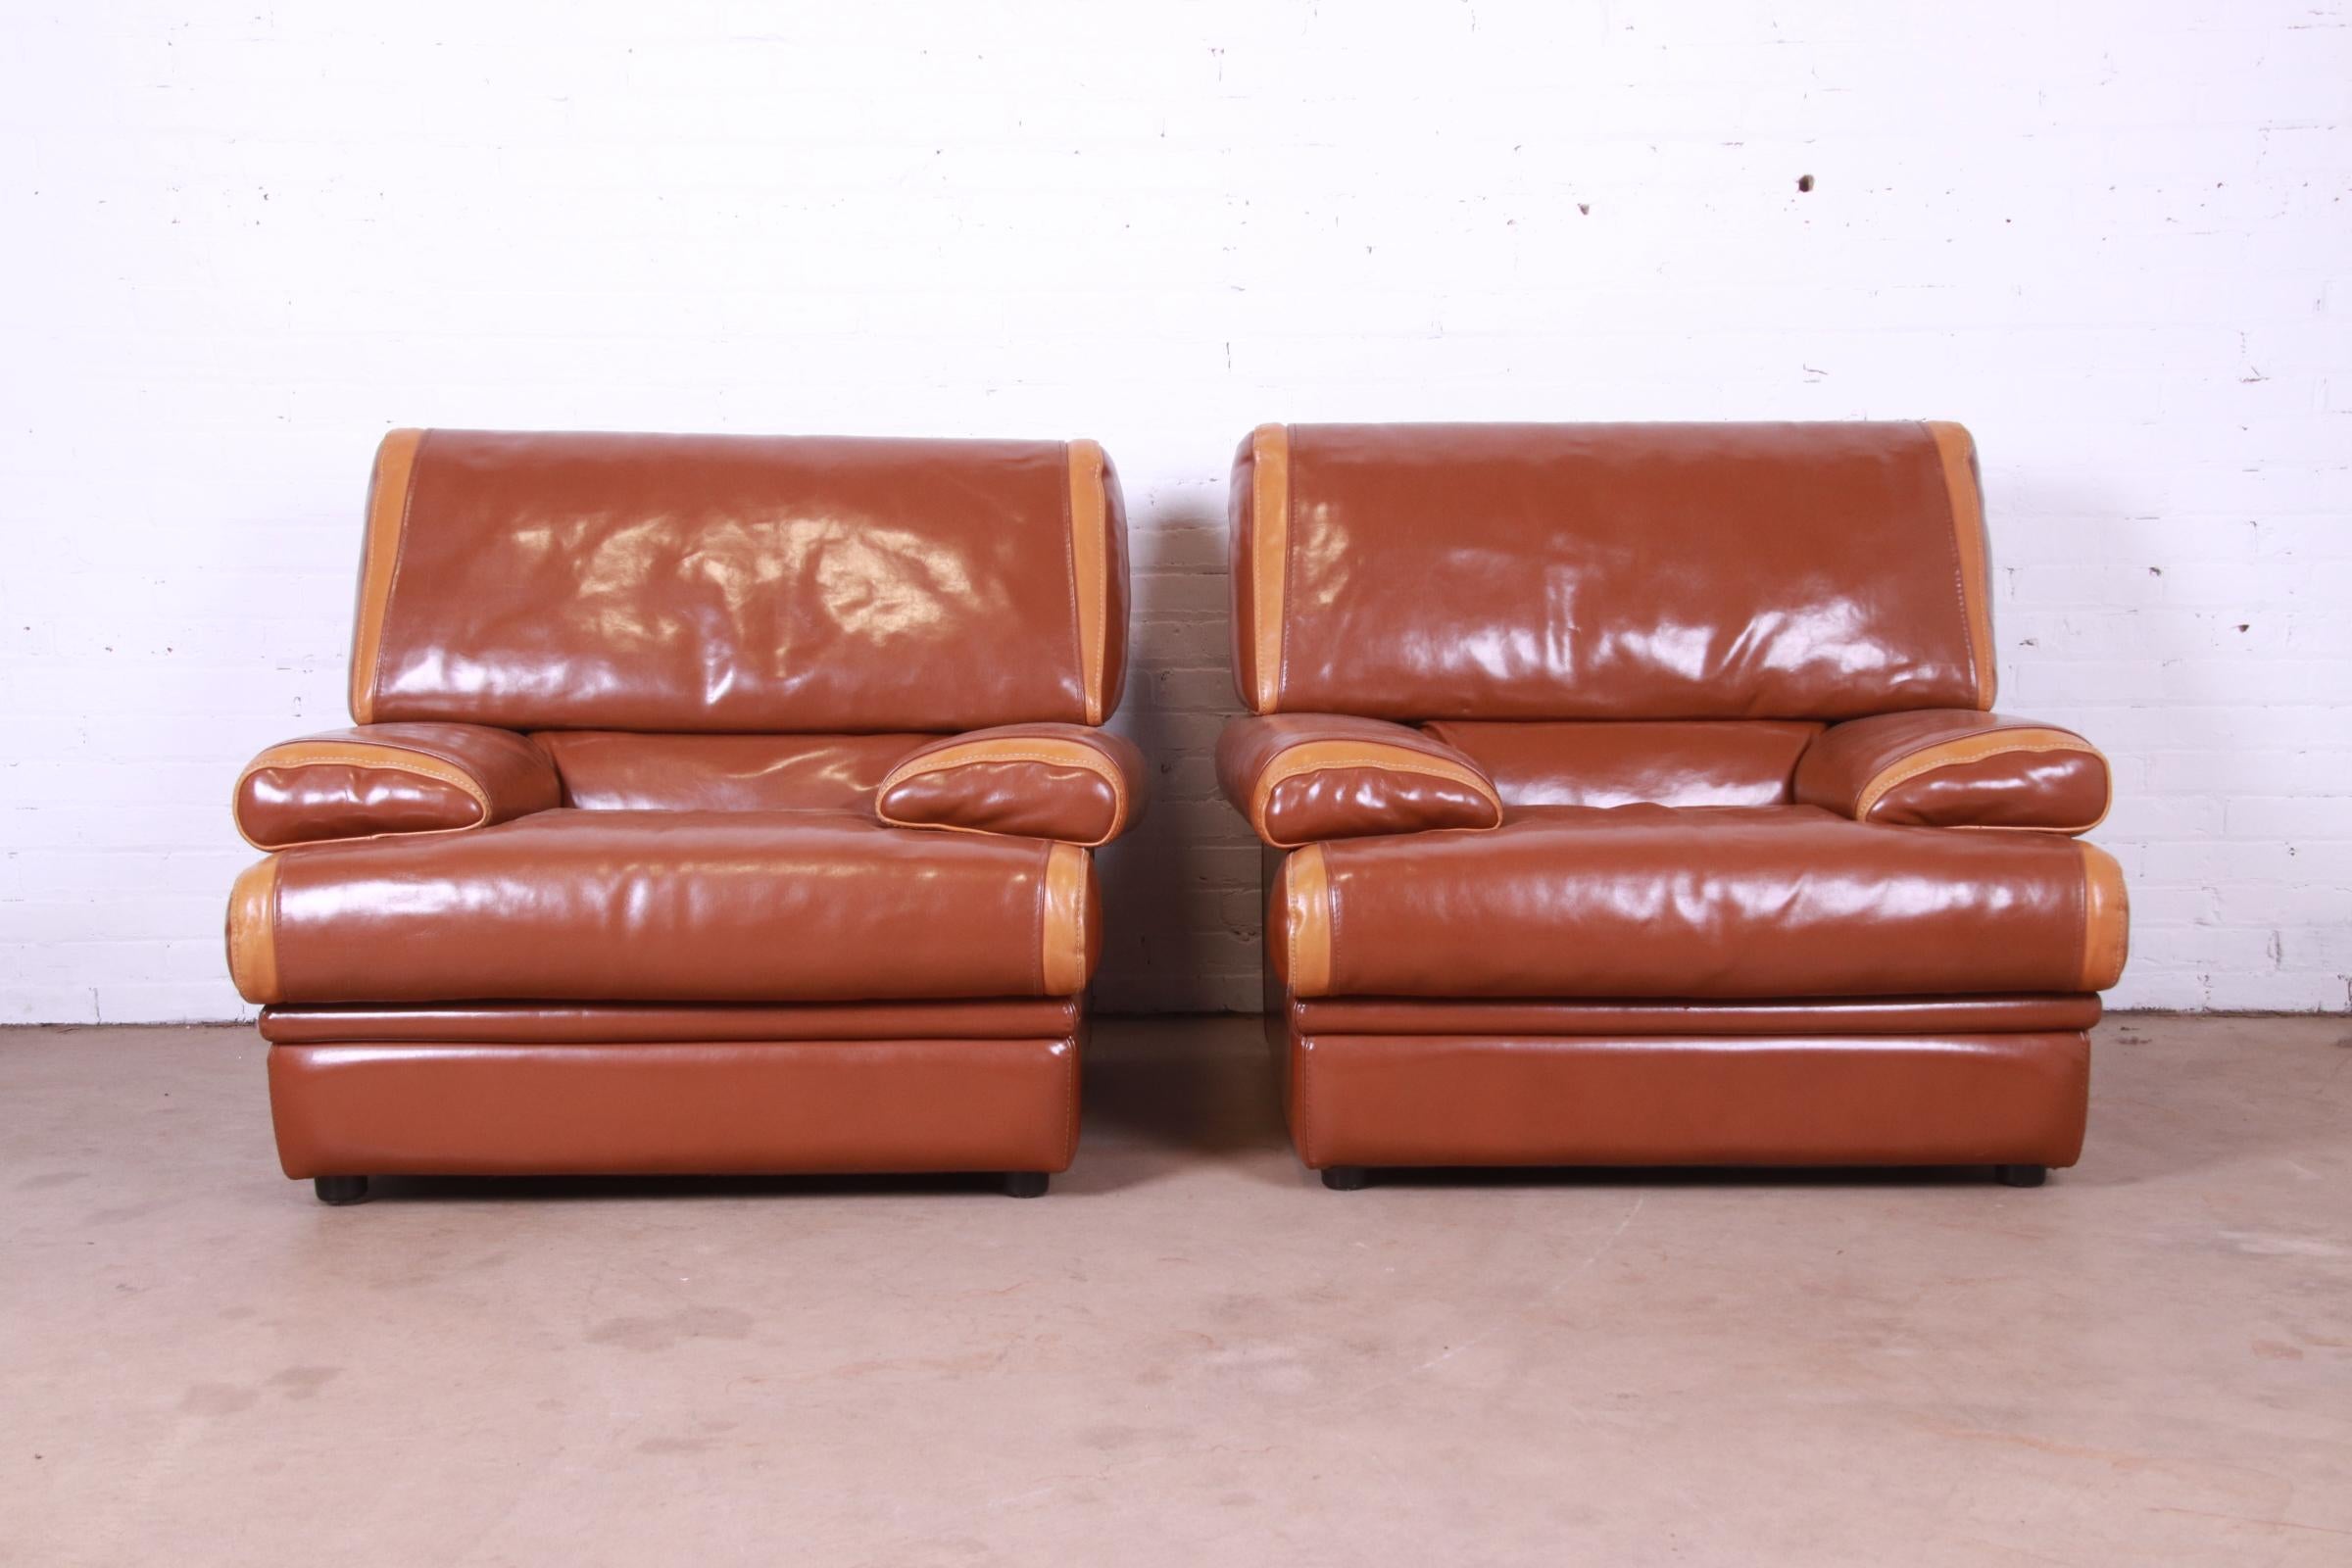 An exceptional pair of Modern Art Deco style oversized leather lounge chairs

By Pierre Cardin

France, 1970s

Measures: 42